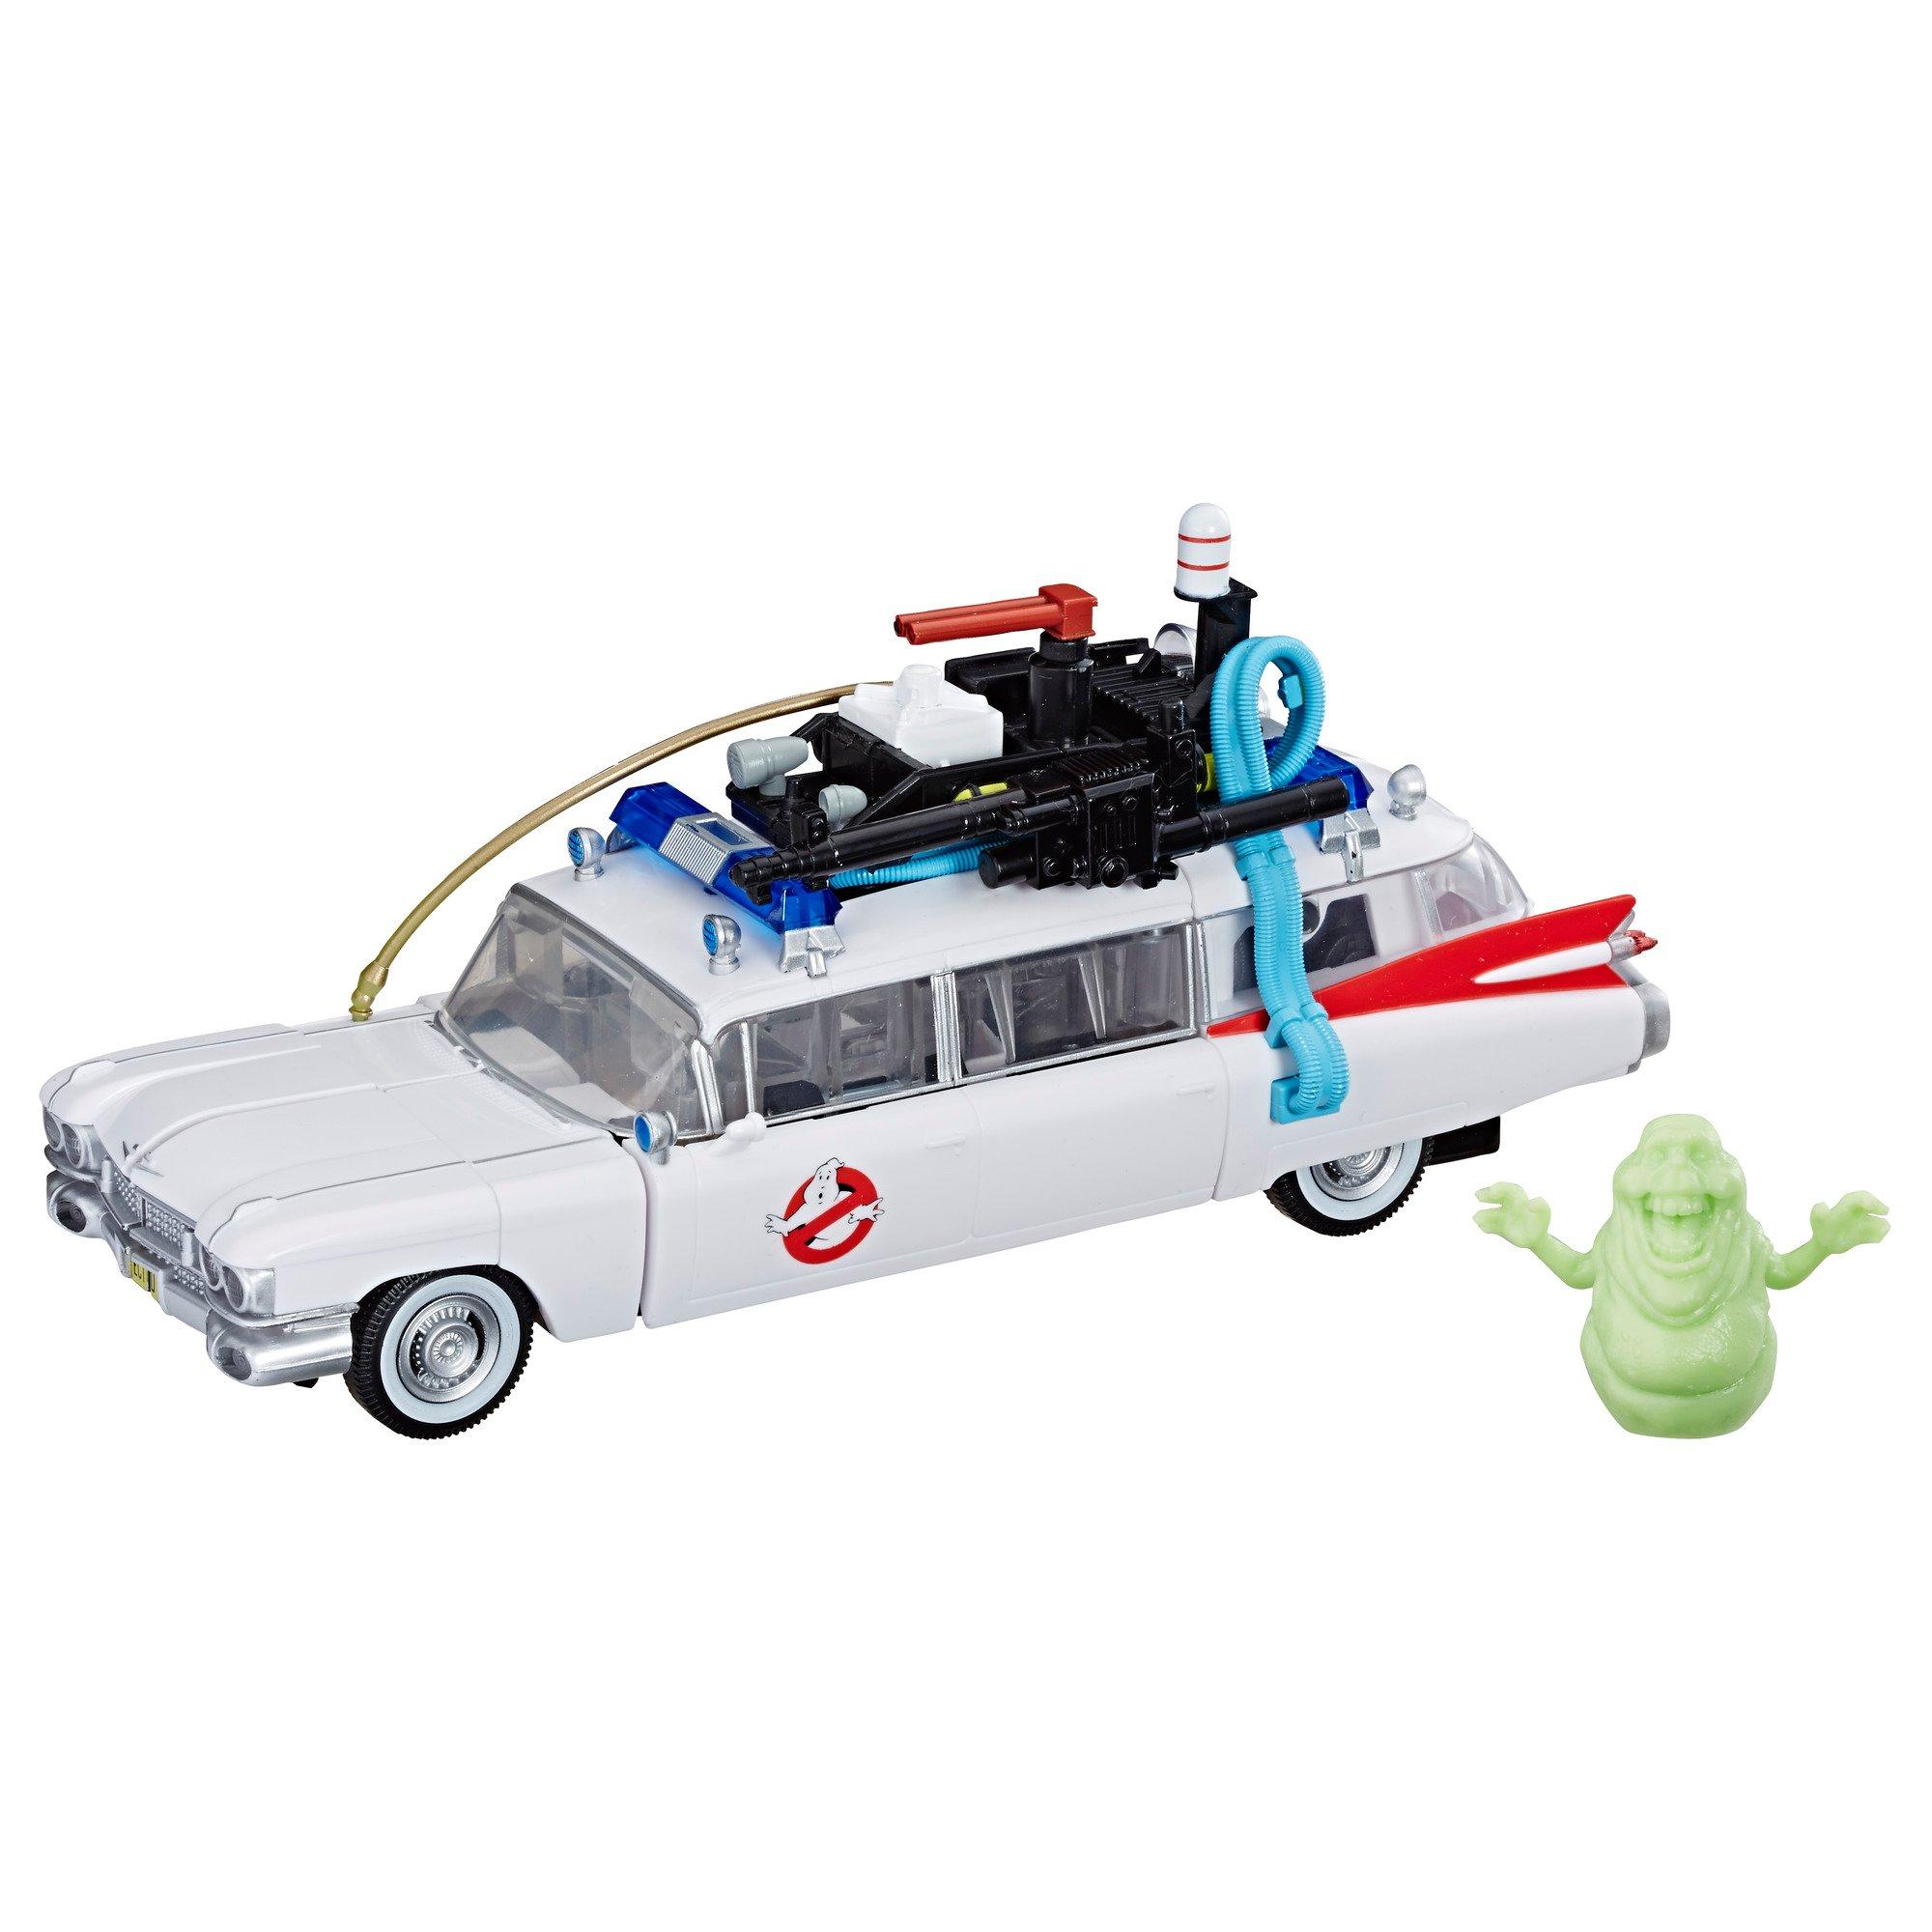 New In Hand Transformers Ghostbusters Ectotron Ecto-1 in stock